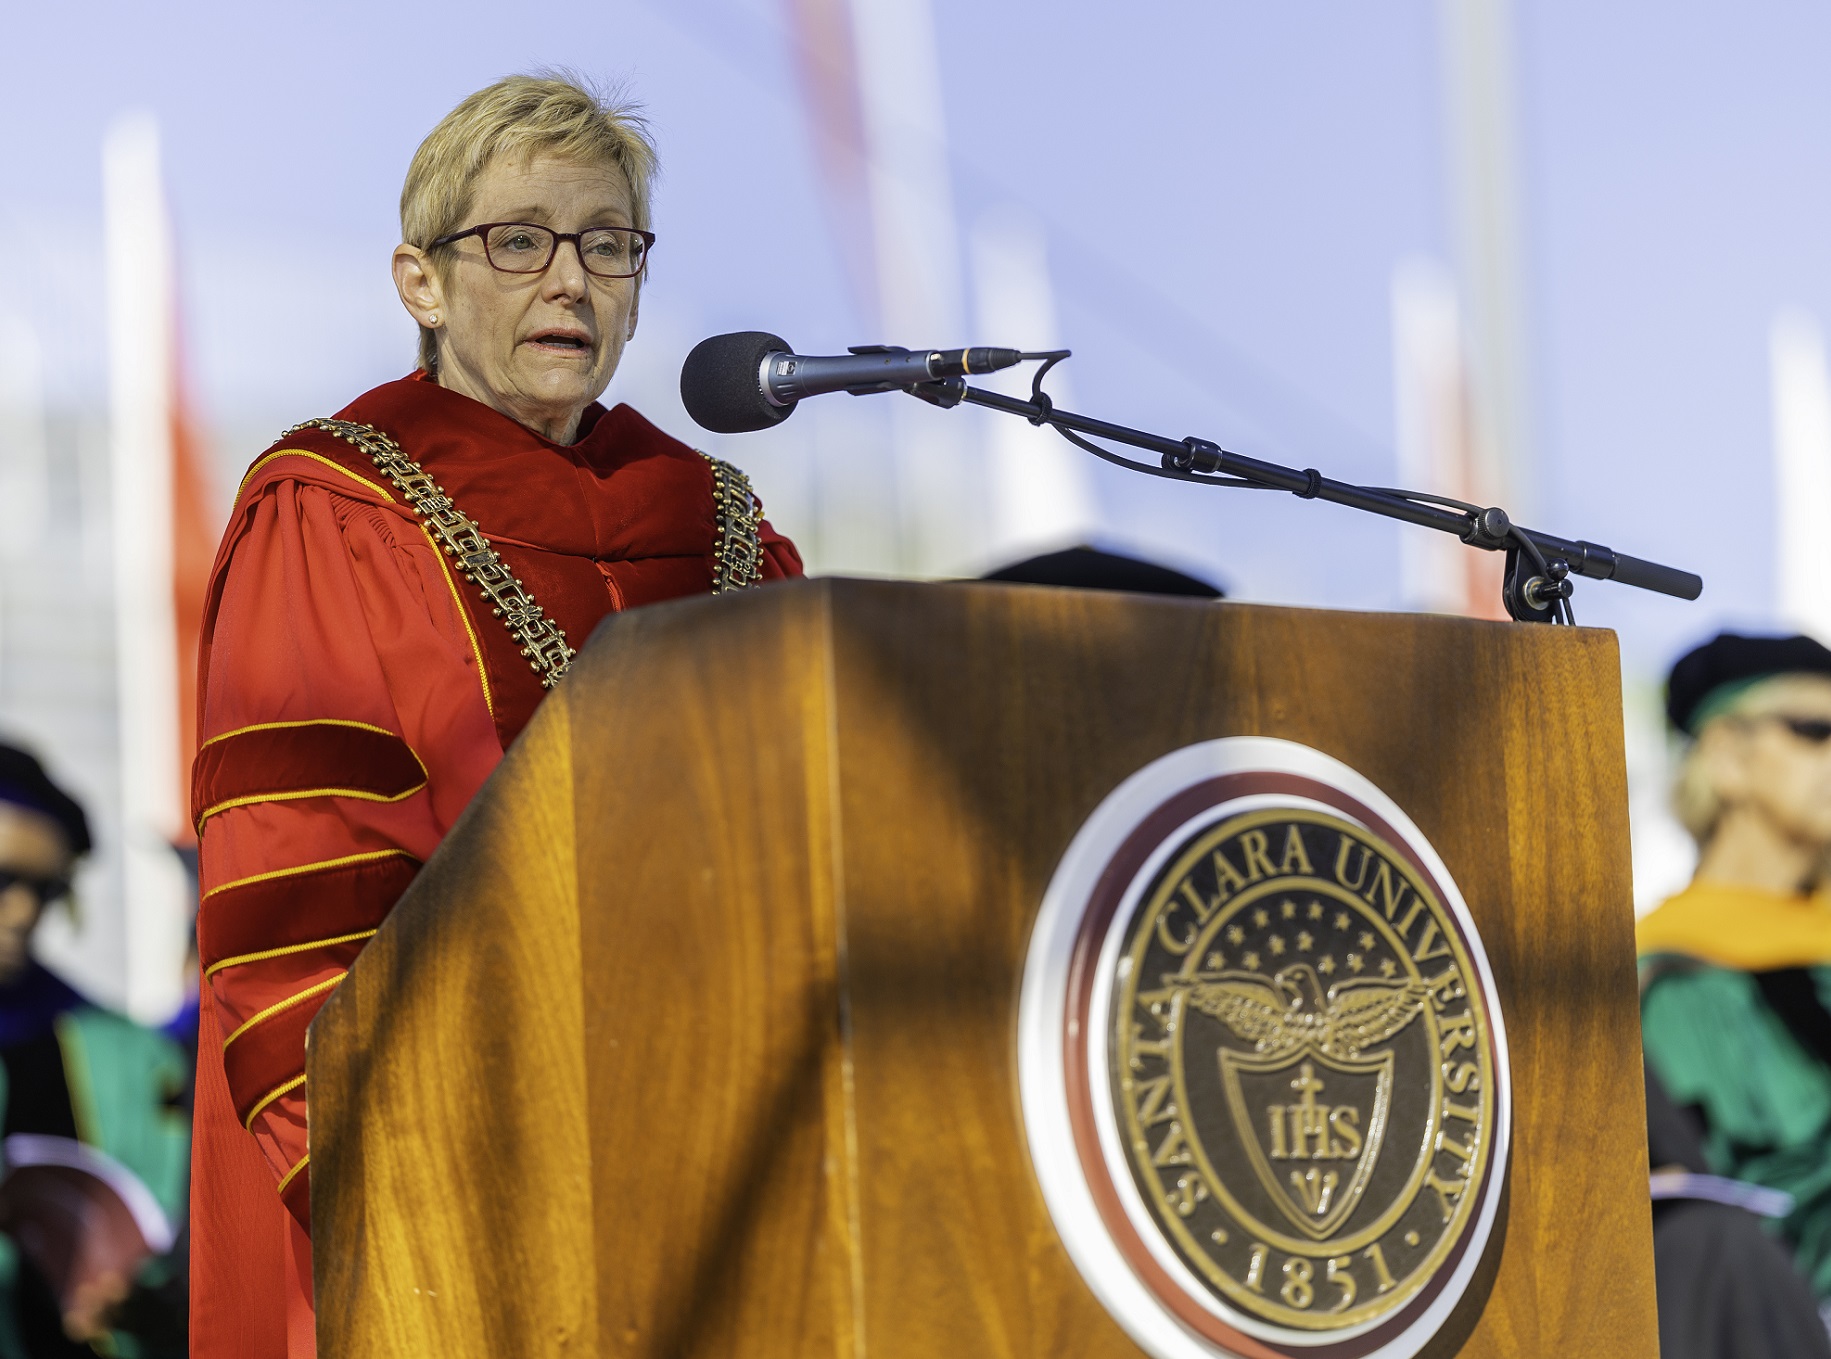 A blonde woman in academic robes at a podium